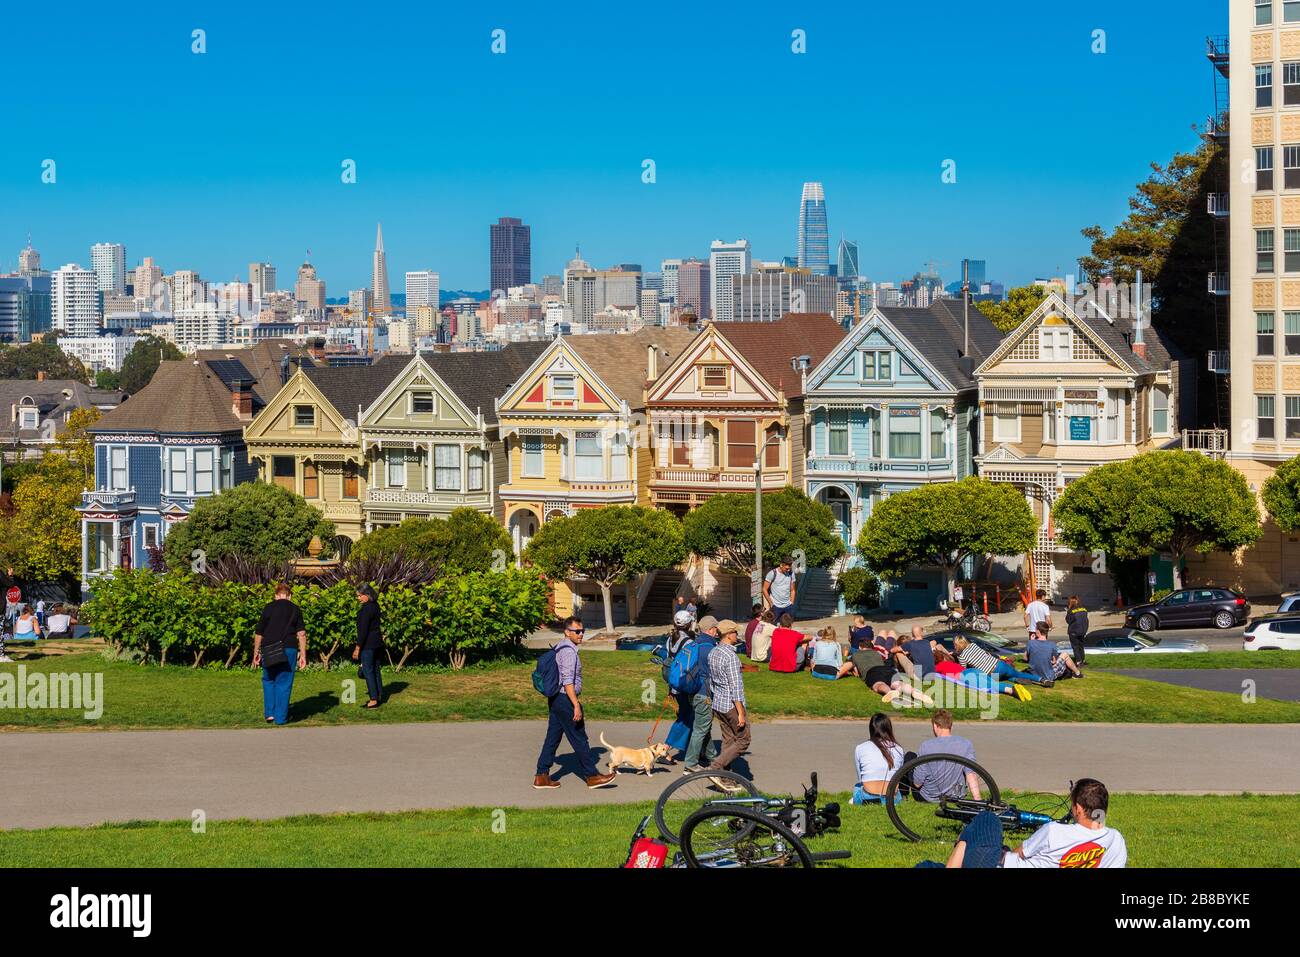 People relaxing in park in front of the Painted Ladies Houses in San Francisco, California, USA. The city skyline can be seen in the background. Stock Photo